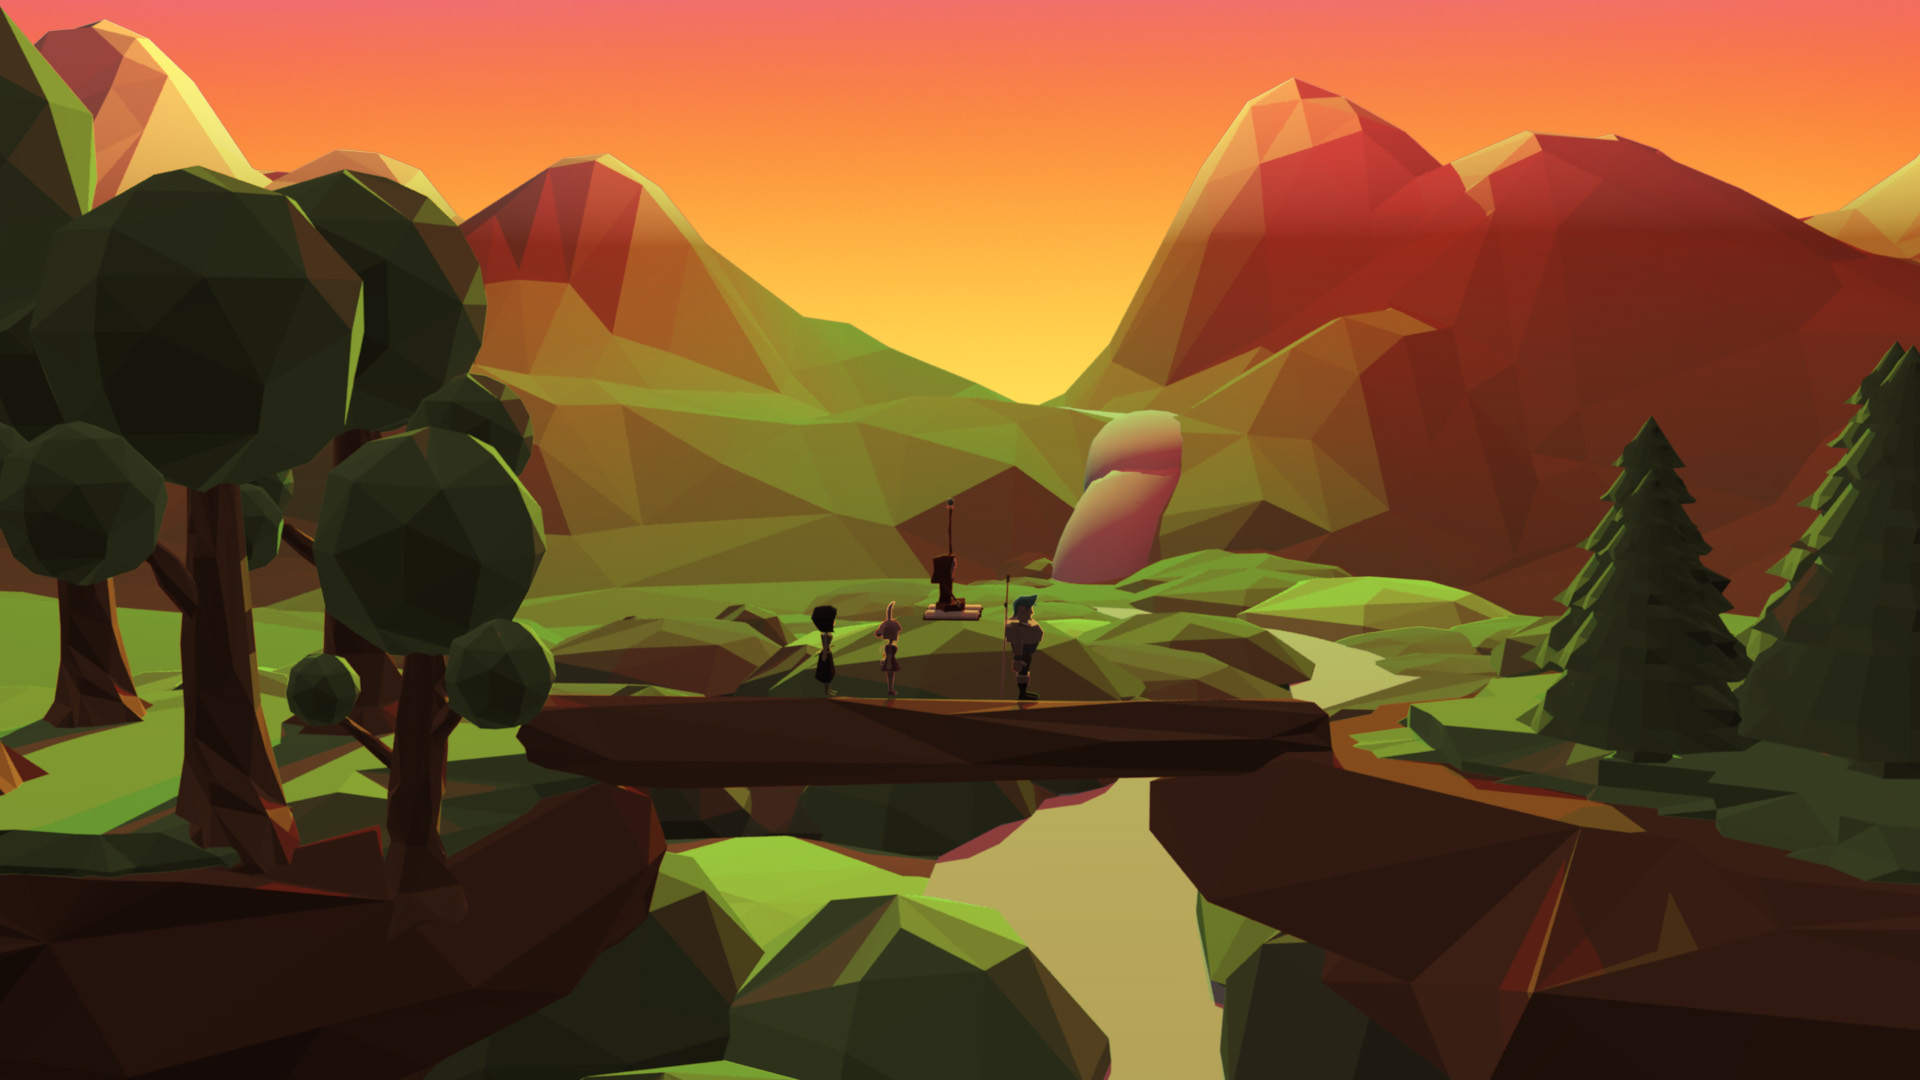 A new version of a landscape with an orange sunset that shows four characters walking on a fallen tree acting as a bridge